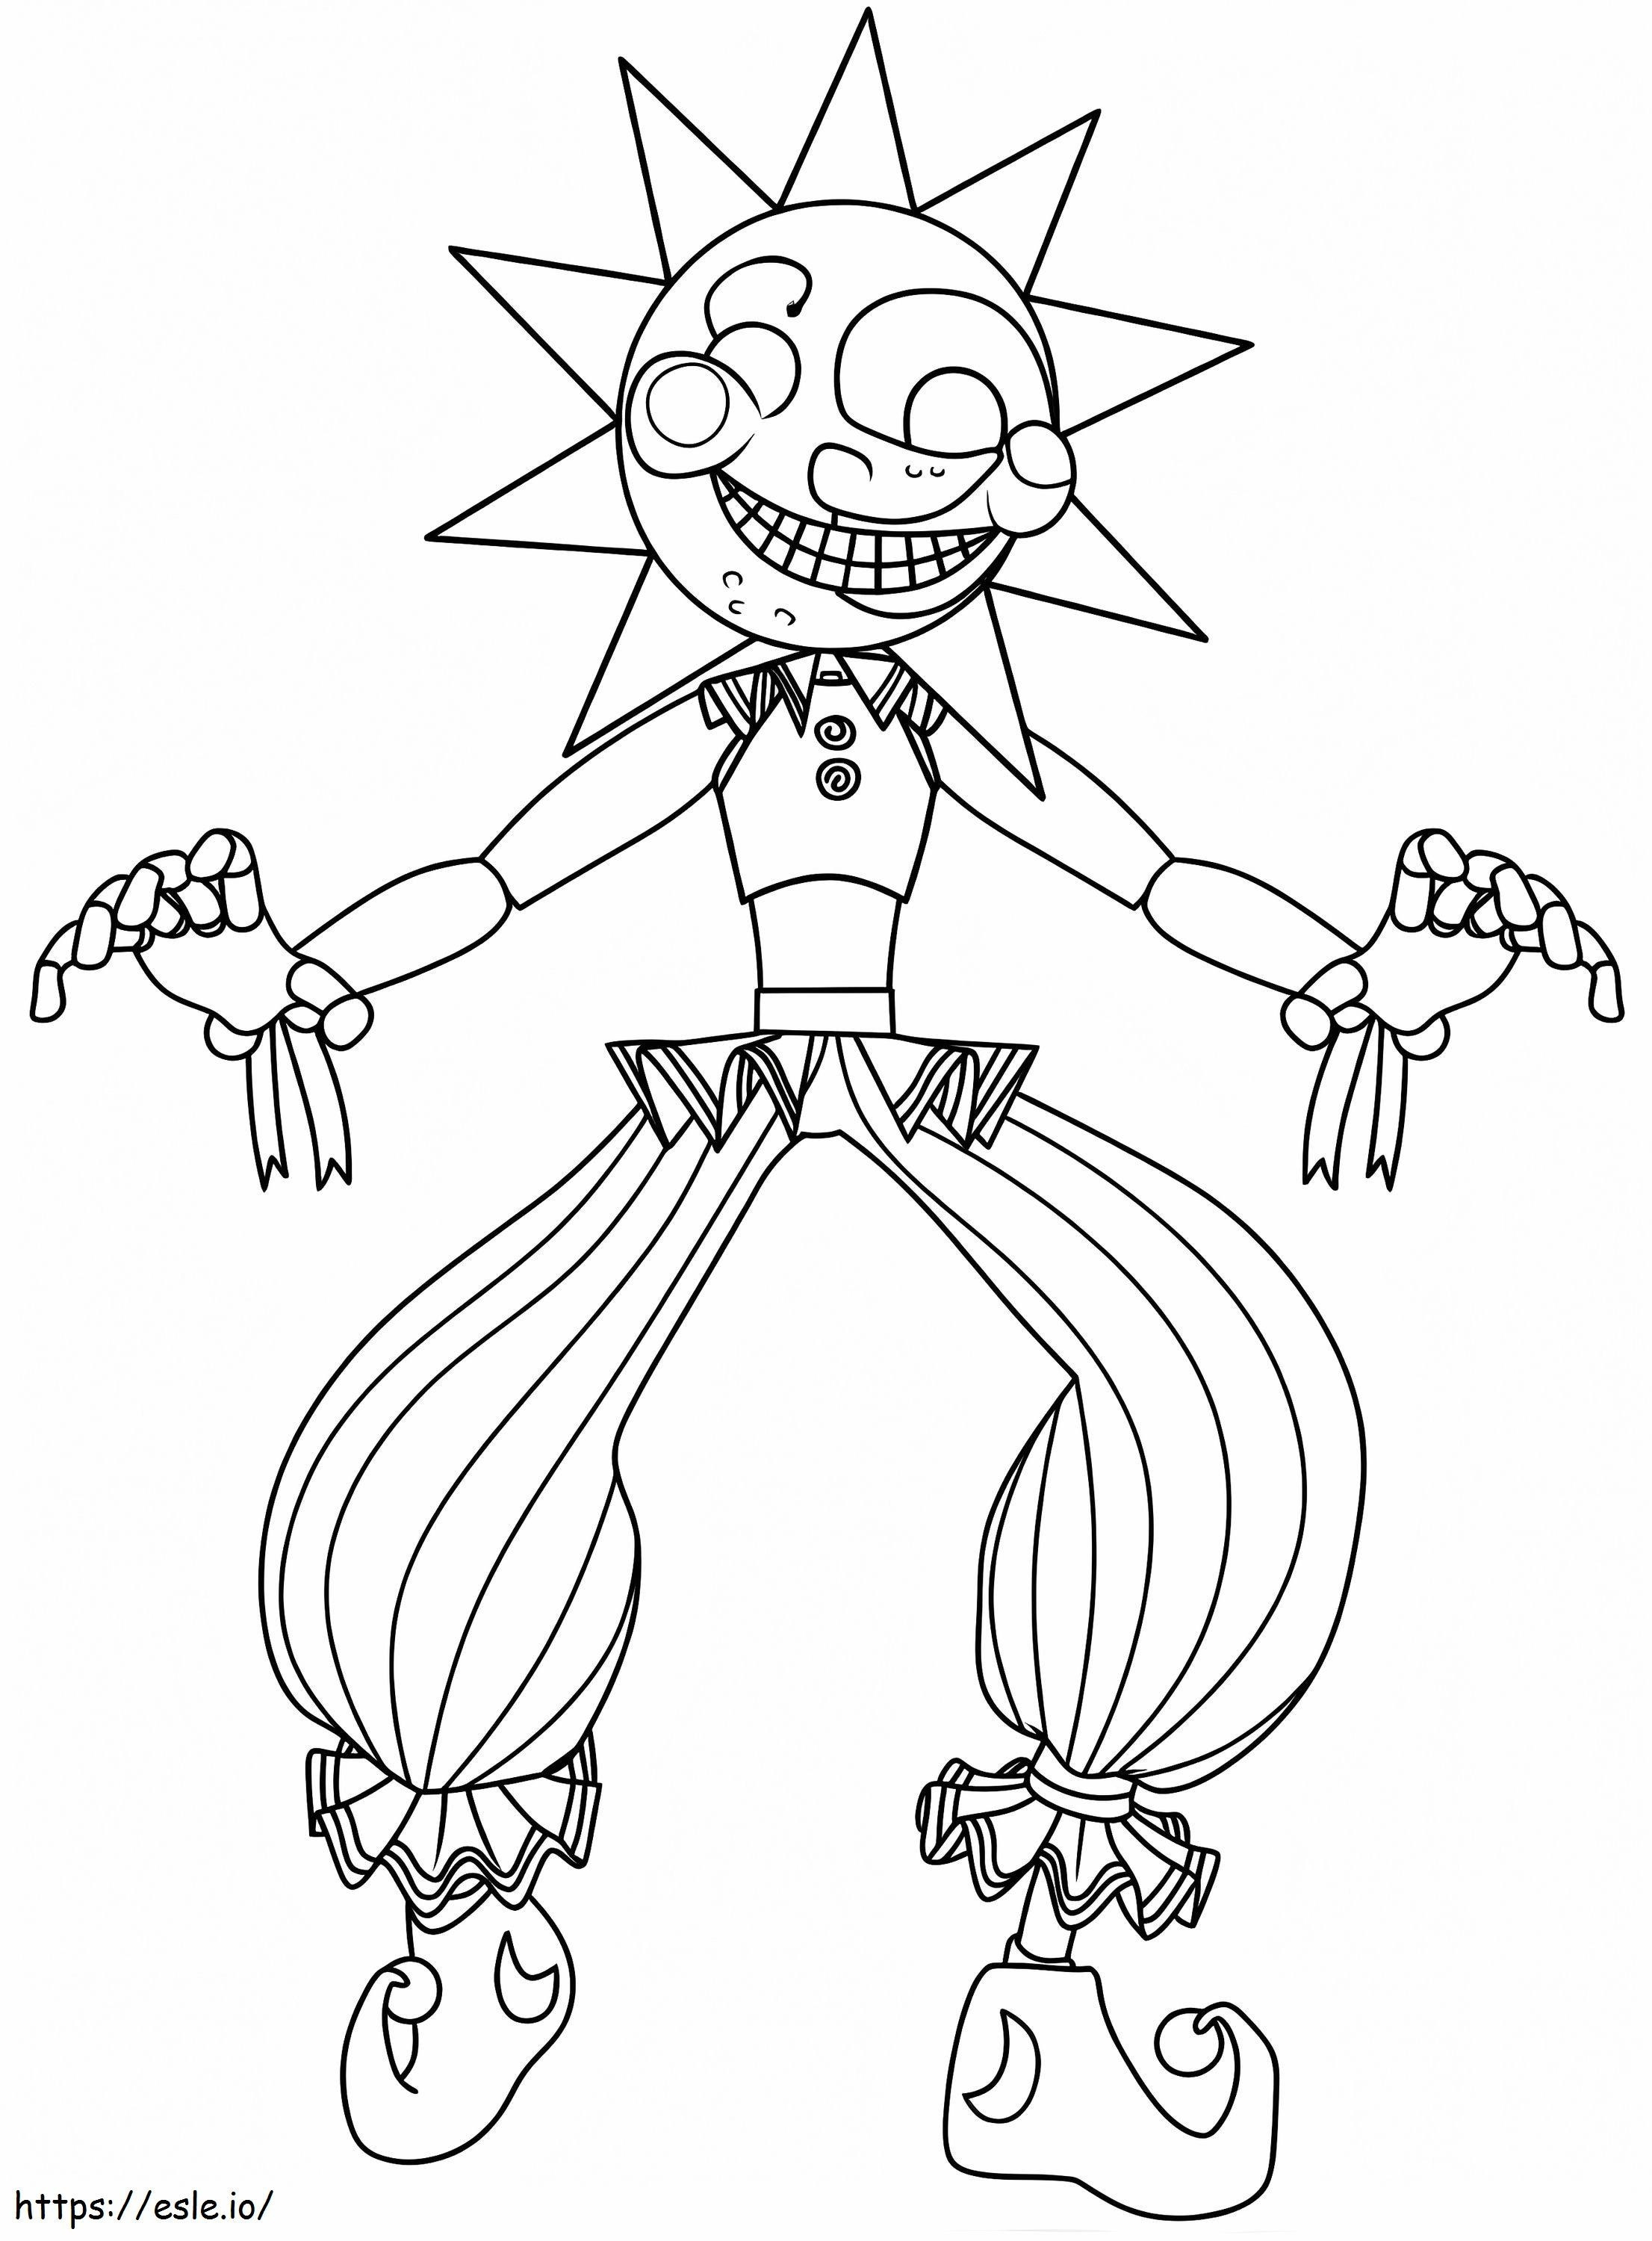 Sundrop FNAF To Color coloring page